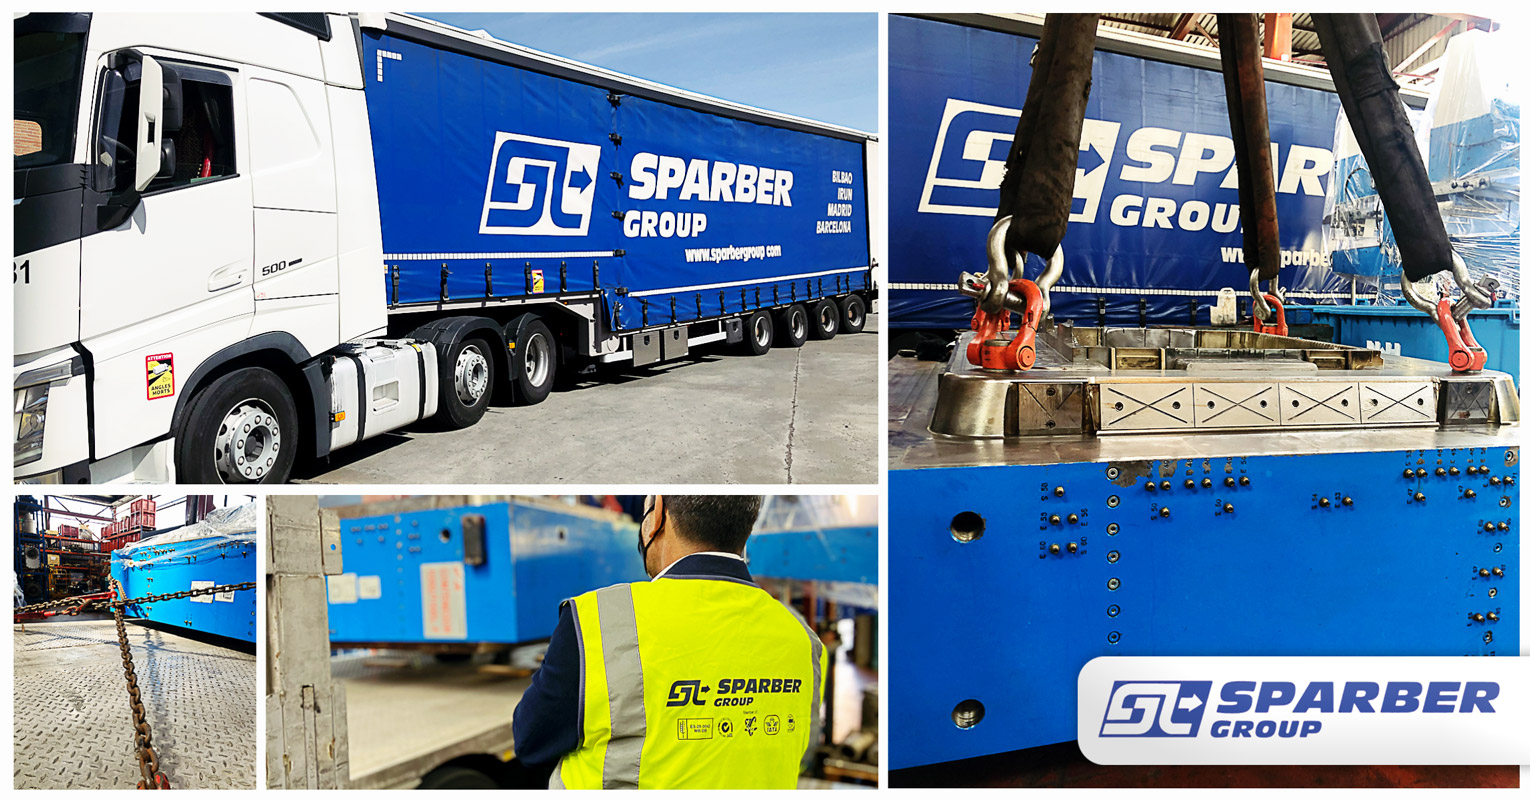 Special Heavy Load from Madrid, Spain to Liverpool, UK on 5 Own Trucks, Each Carried a 30 Ton Piece of a Mold